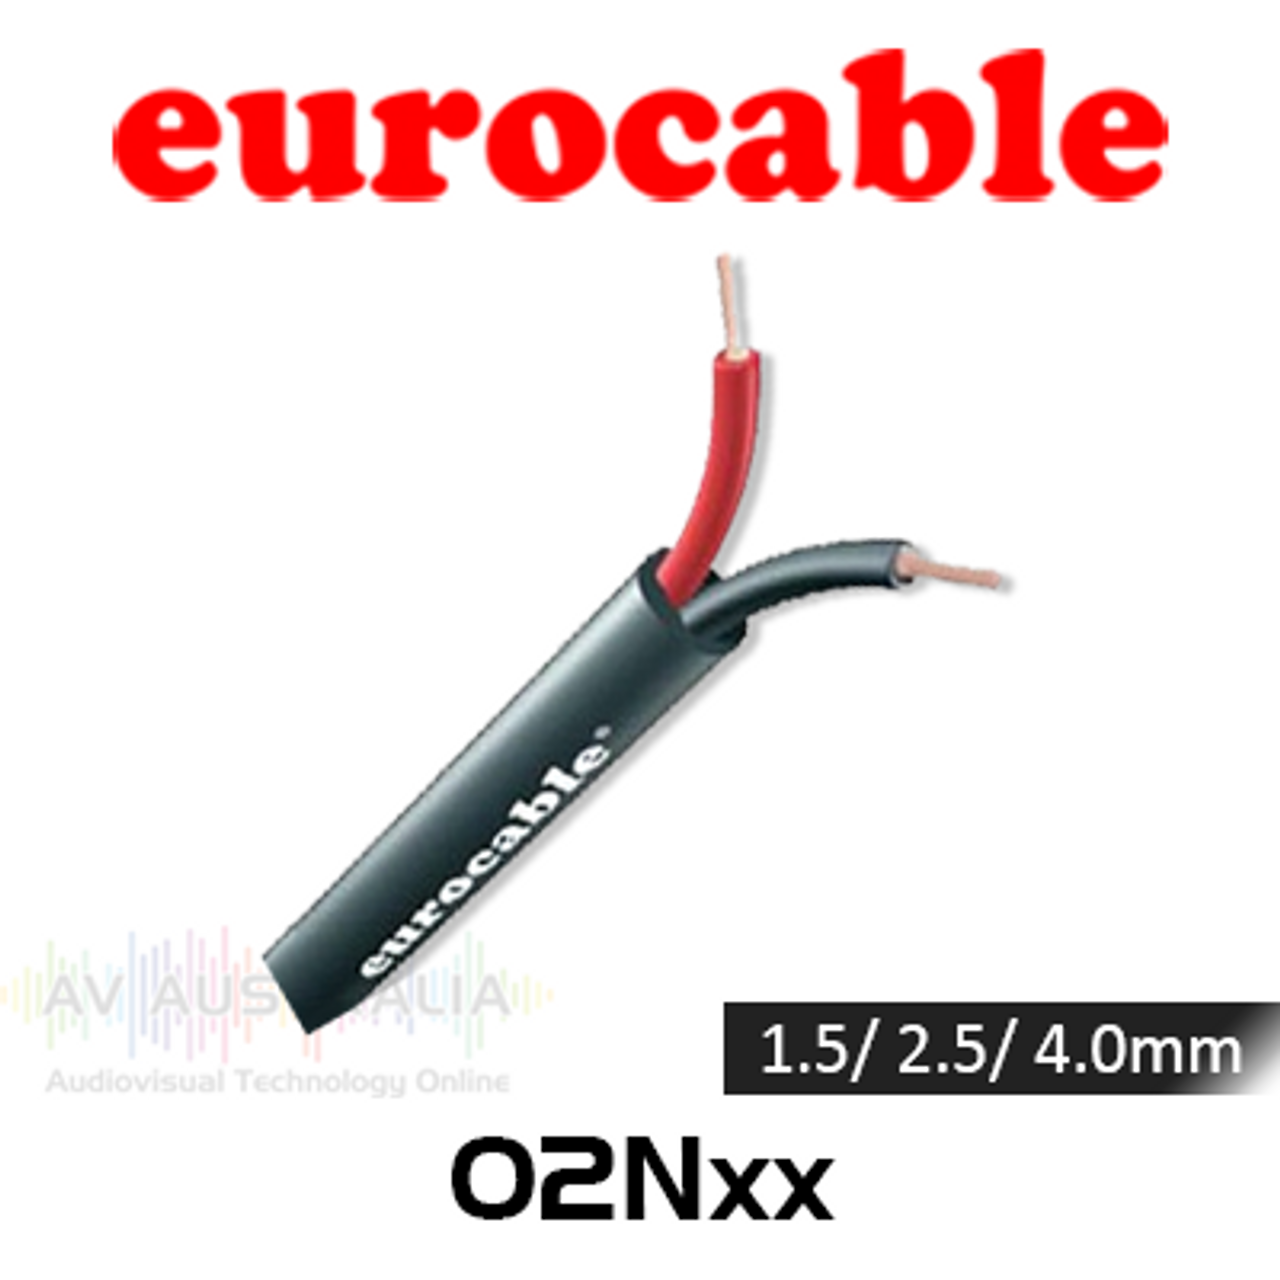 Eurocable 2 Core Flame Resistant Speaker Cable - 100m